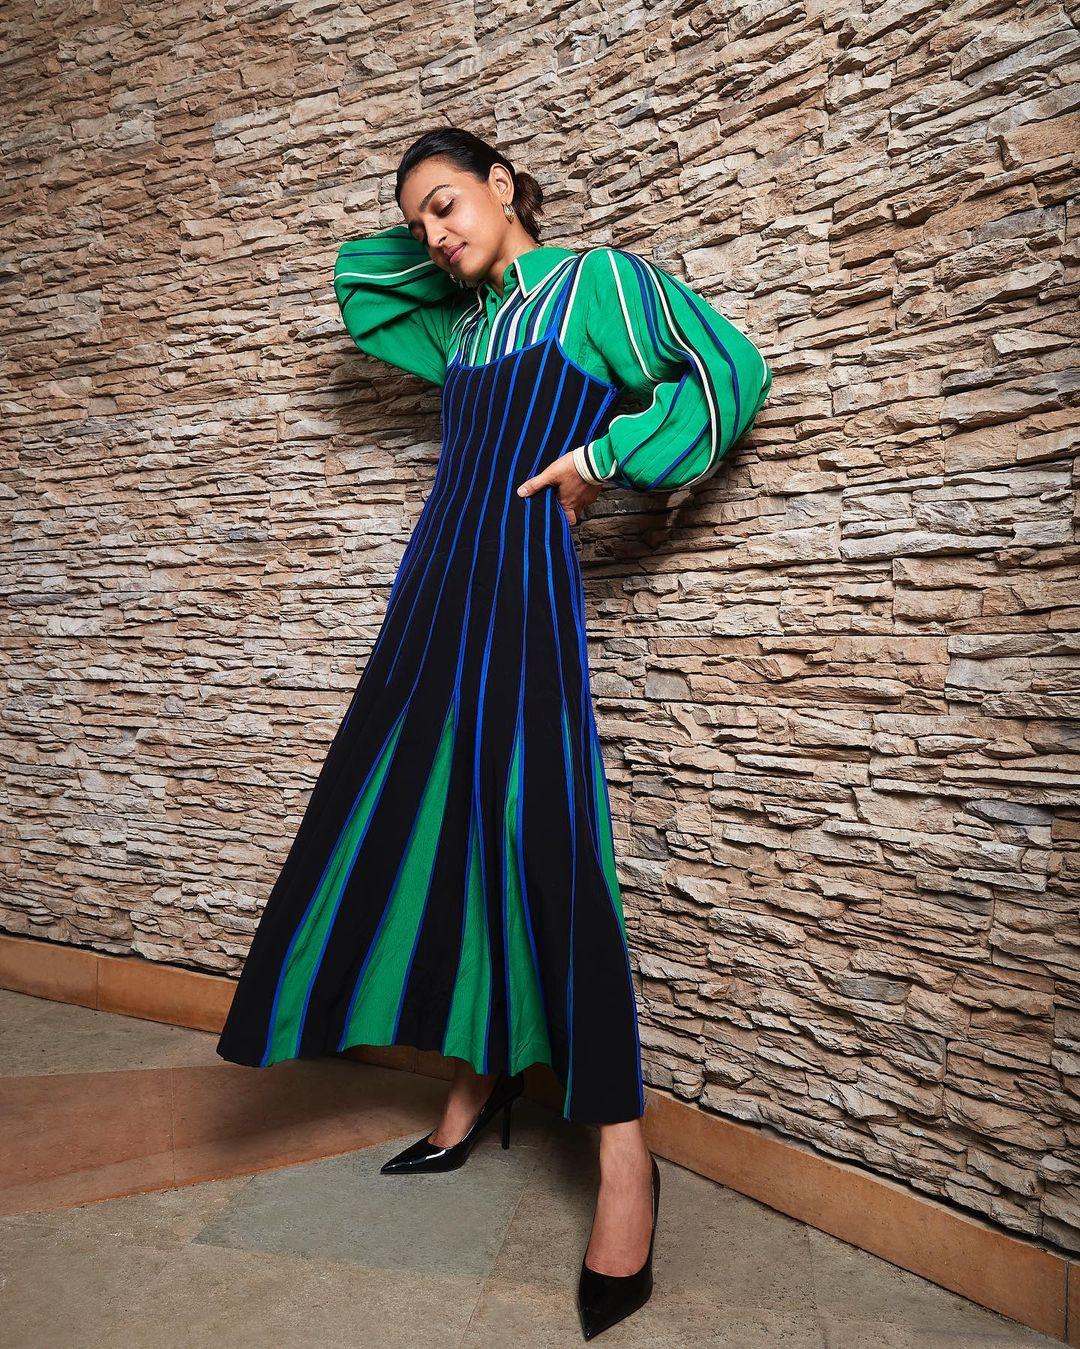 In a green and blue pleated dress, Radhika Apte effortlessly embodies casual chic.